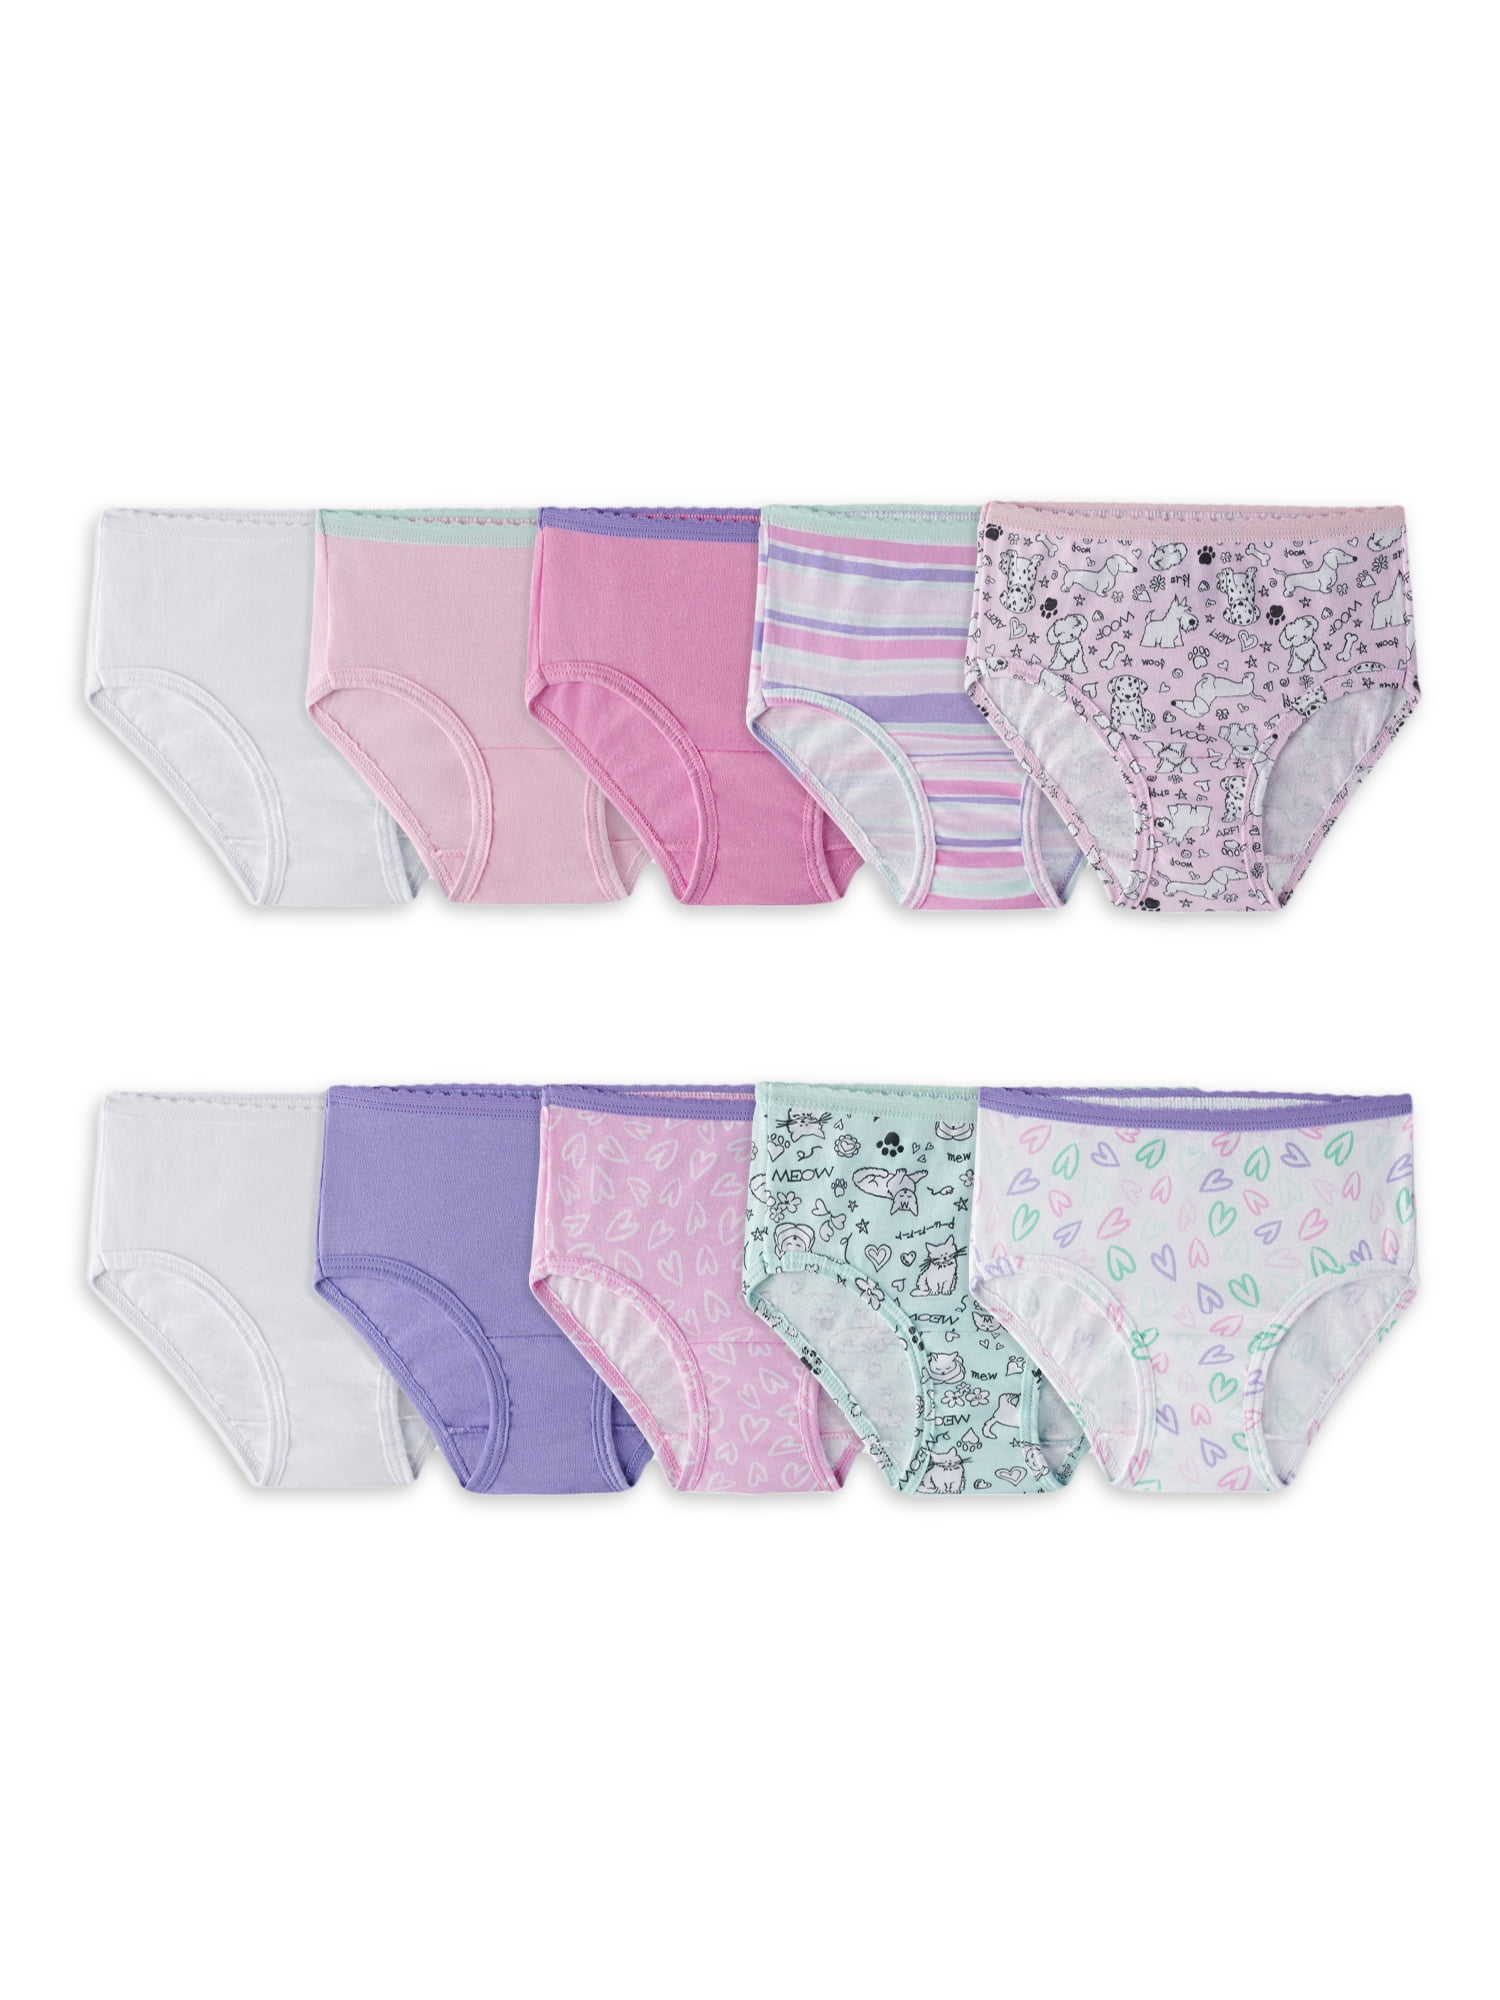 Fruit of the Loom Toddler Girl EverSoft Cotton Brief Underwear, 10 Pack